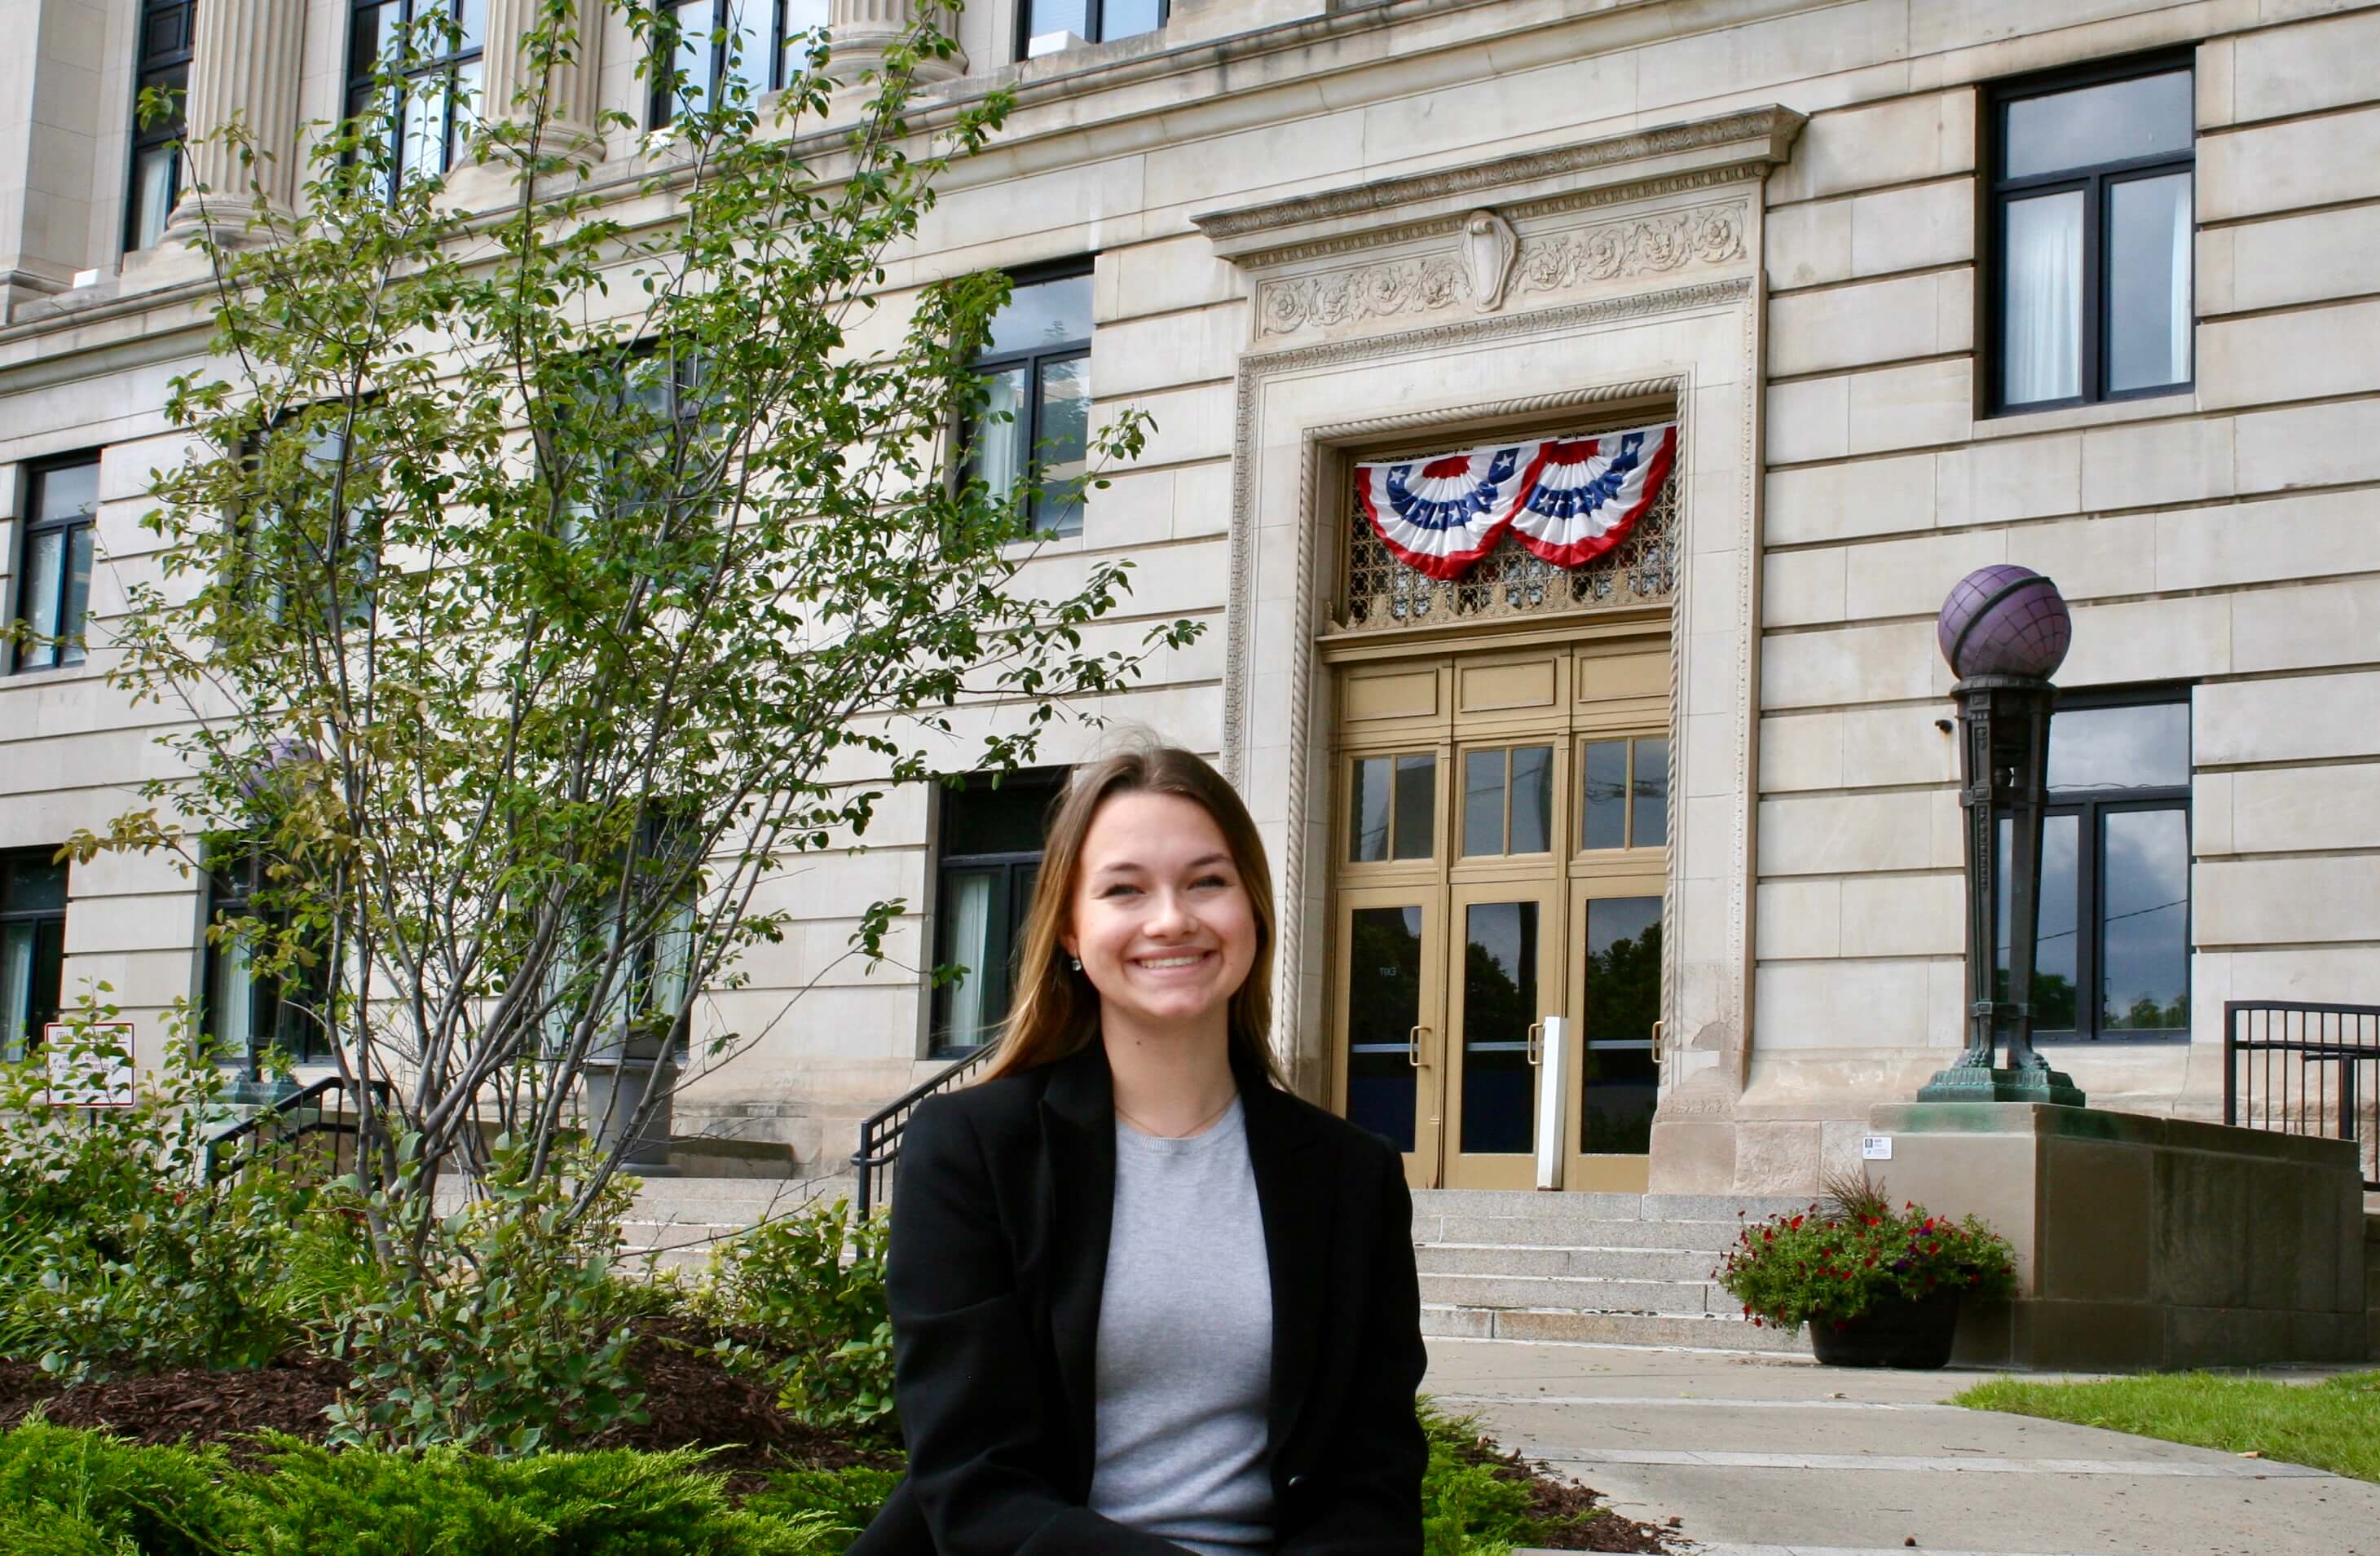 Photo of Hannah Hawes, Junior at MSU studying Criminal Justice and currently interning with the Genesee County Public Defenders Office